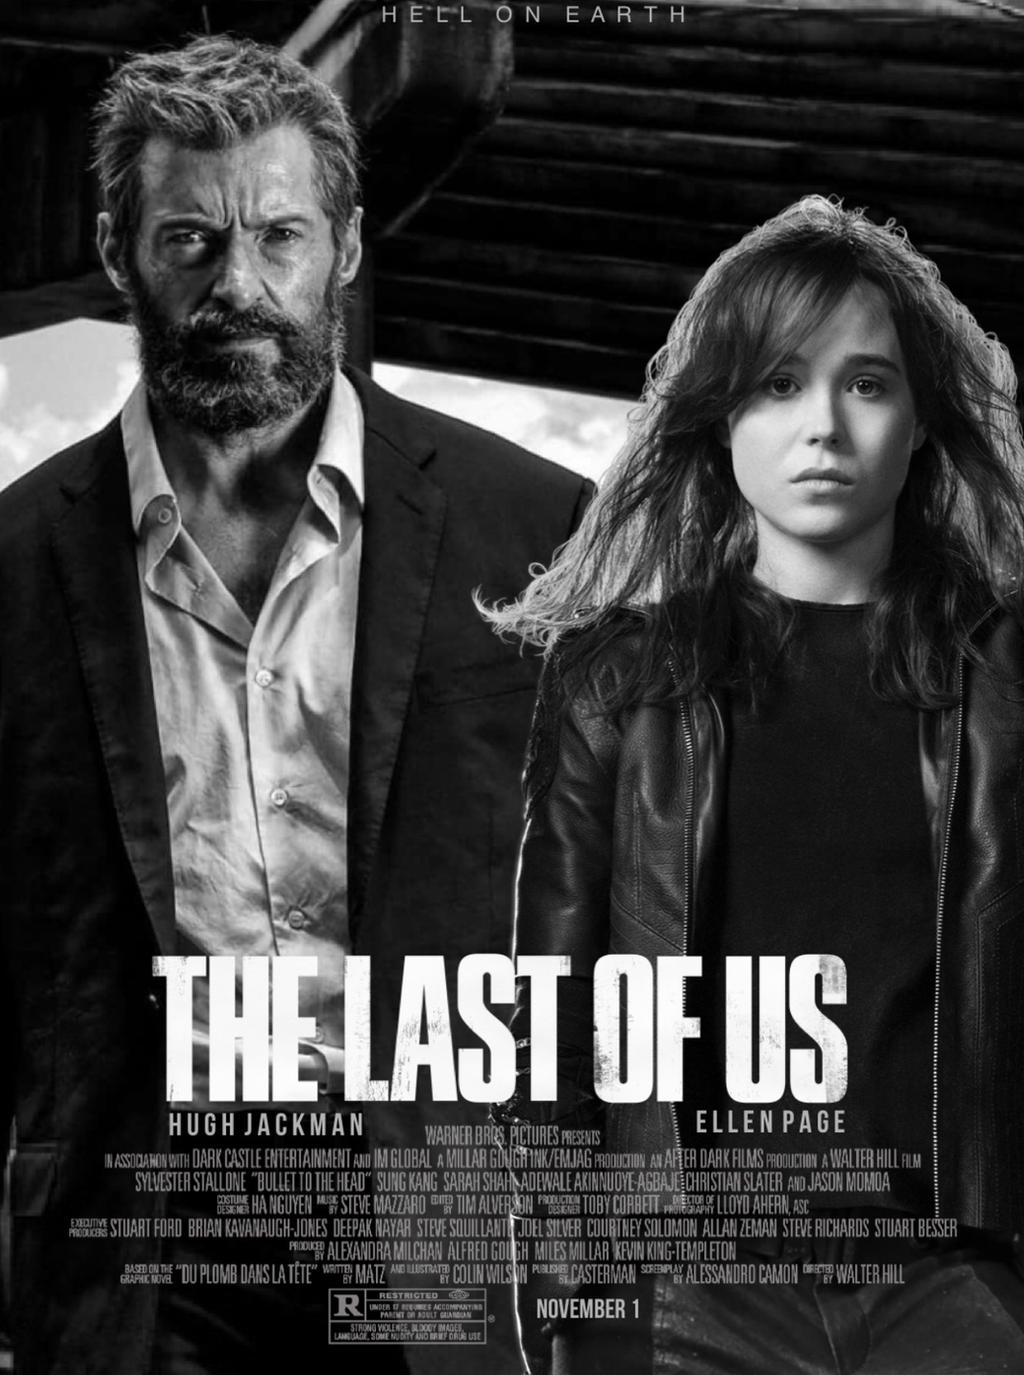 The Last Of Us Movie Poster by Stark3879 on DeviantArt